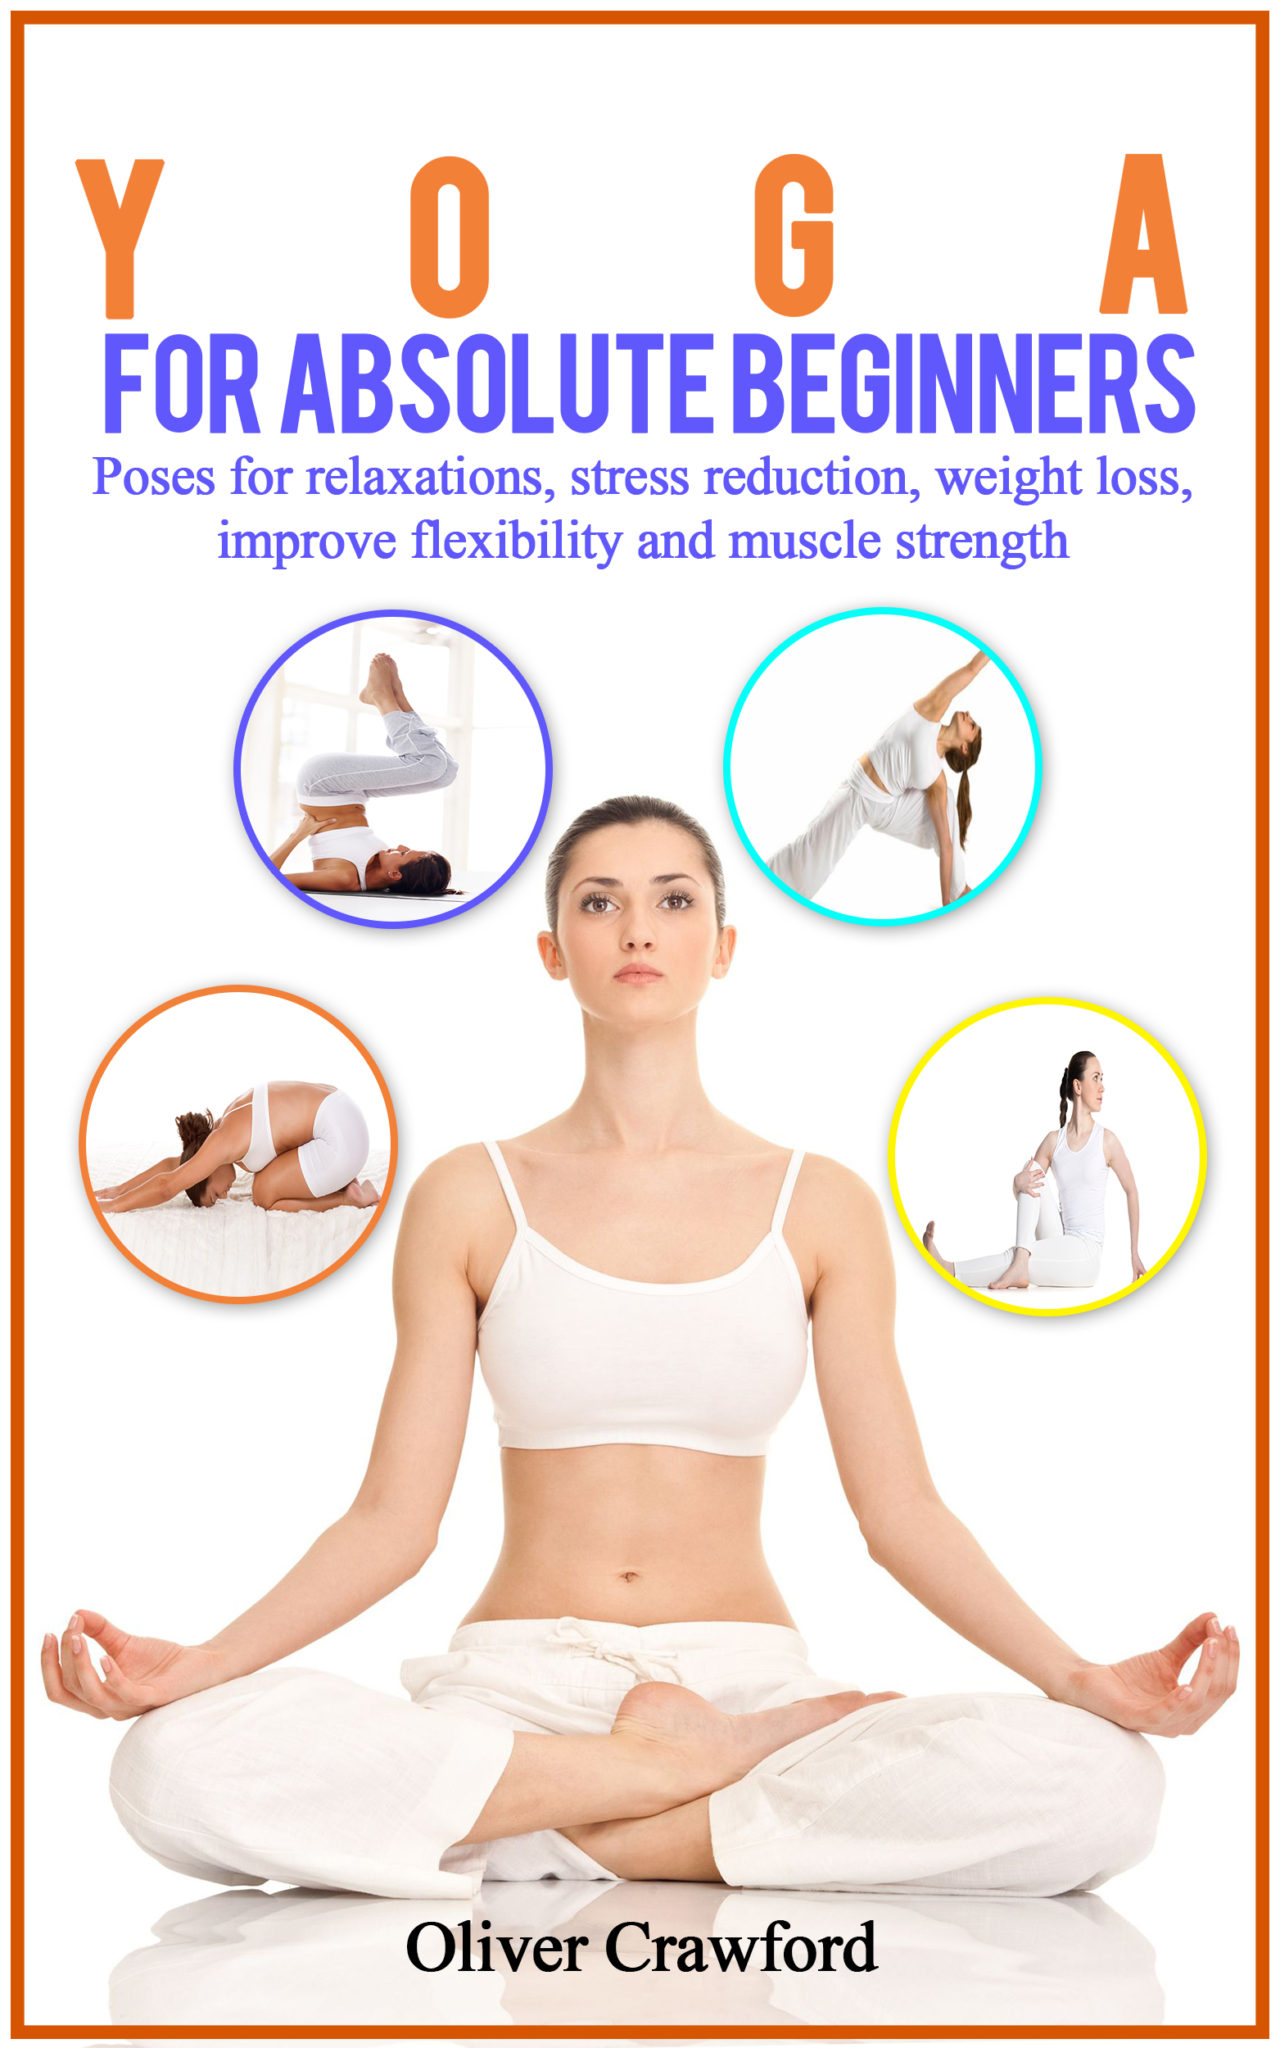 FREE: Yoga for Absolute Beginners by Oliver Crawford